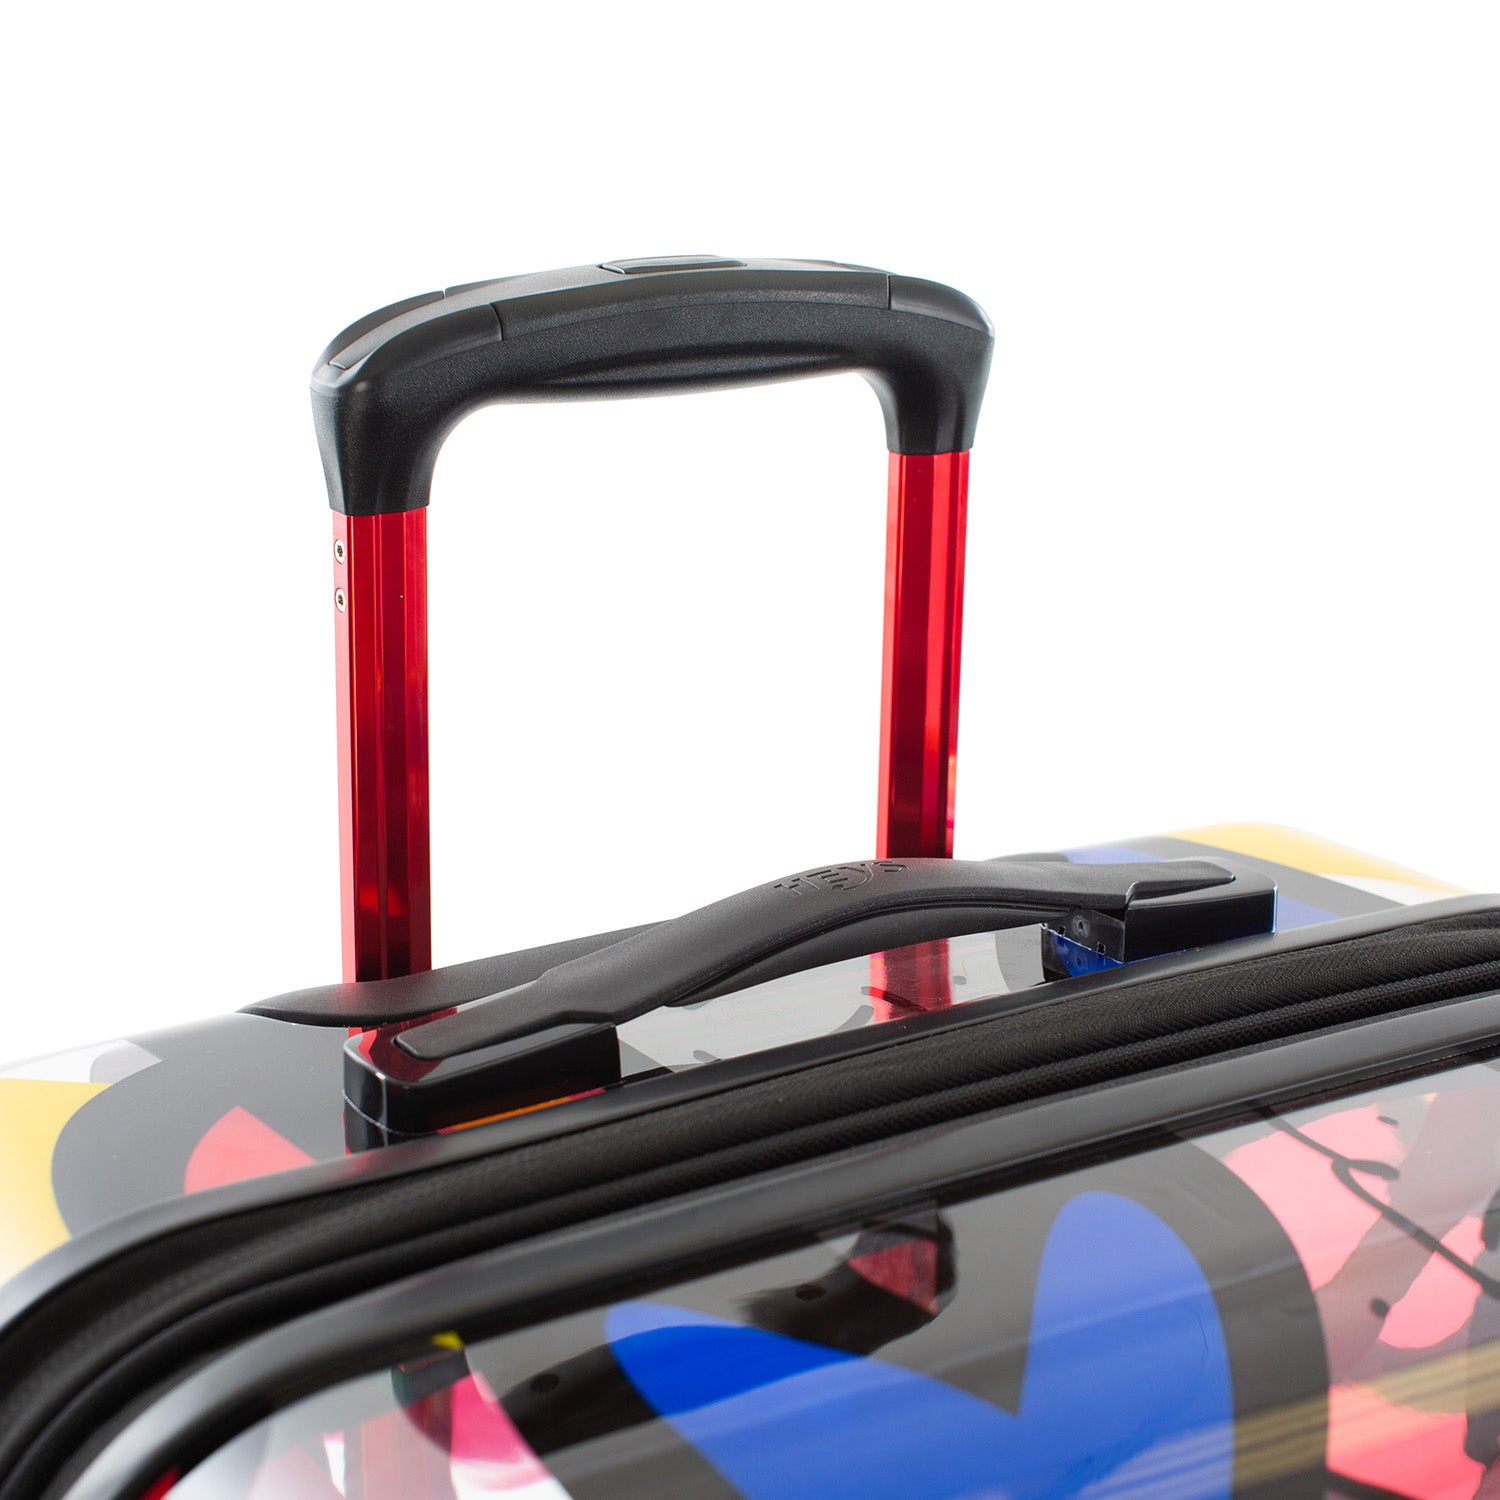 Britto - A New Day Transparent 26" Luggage